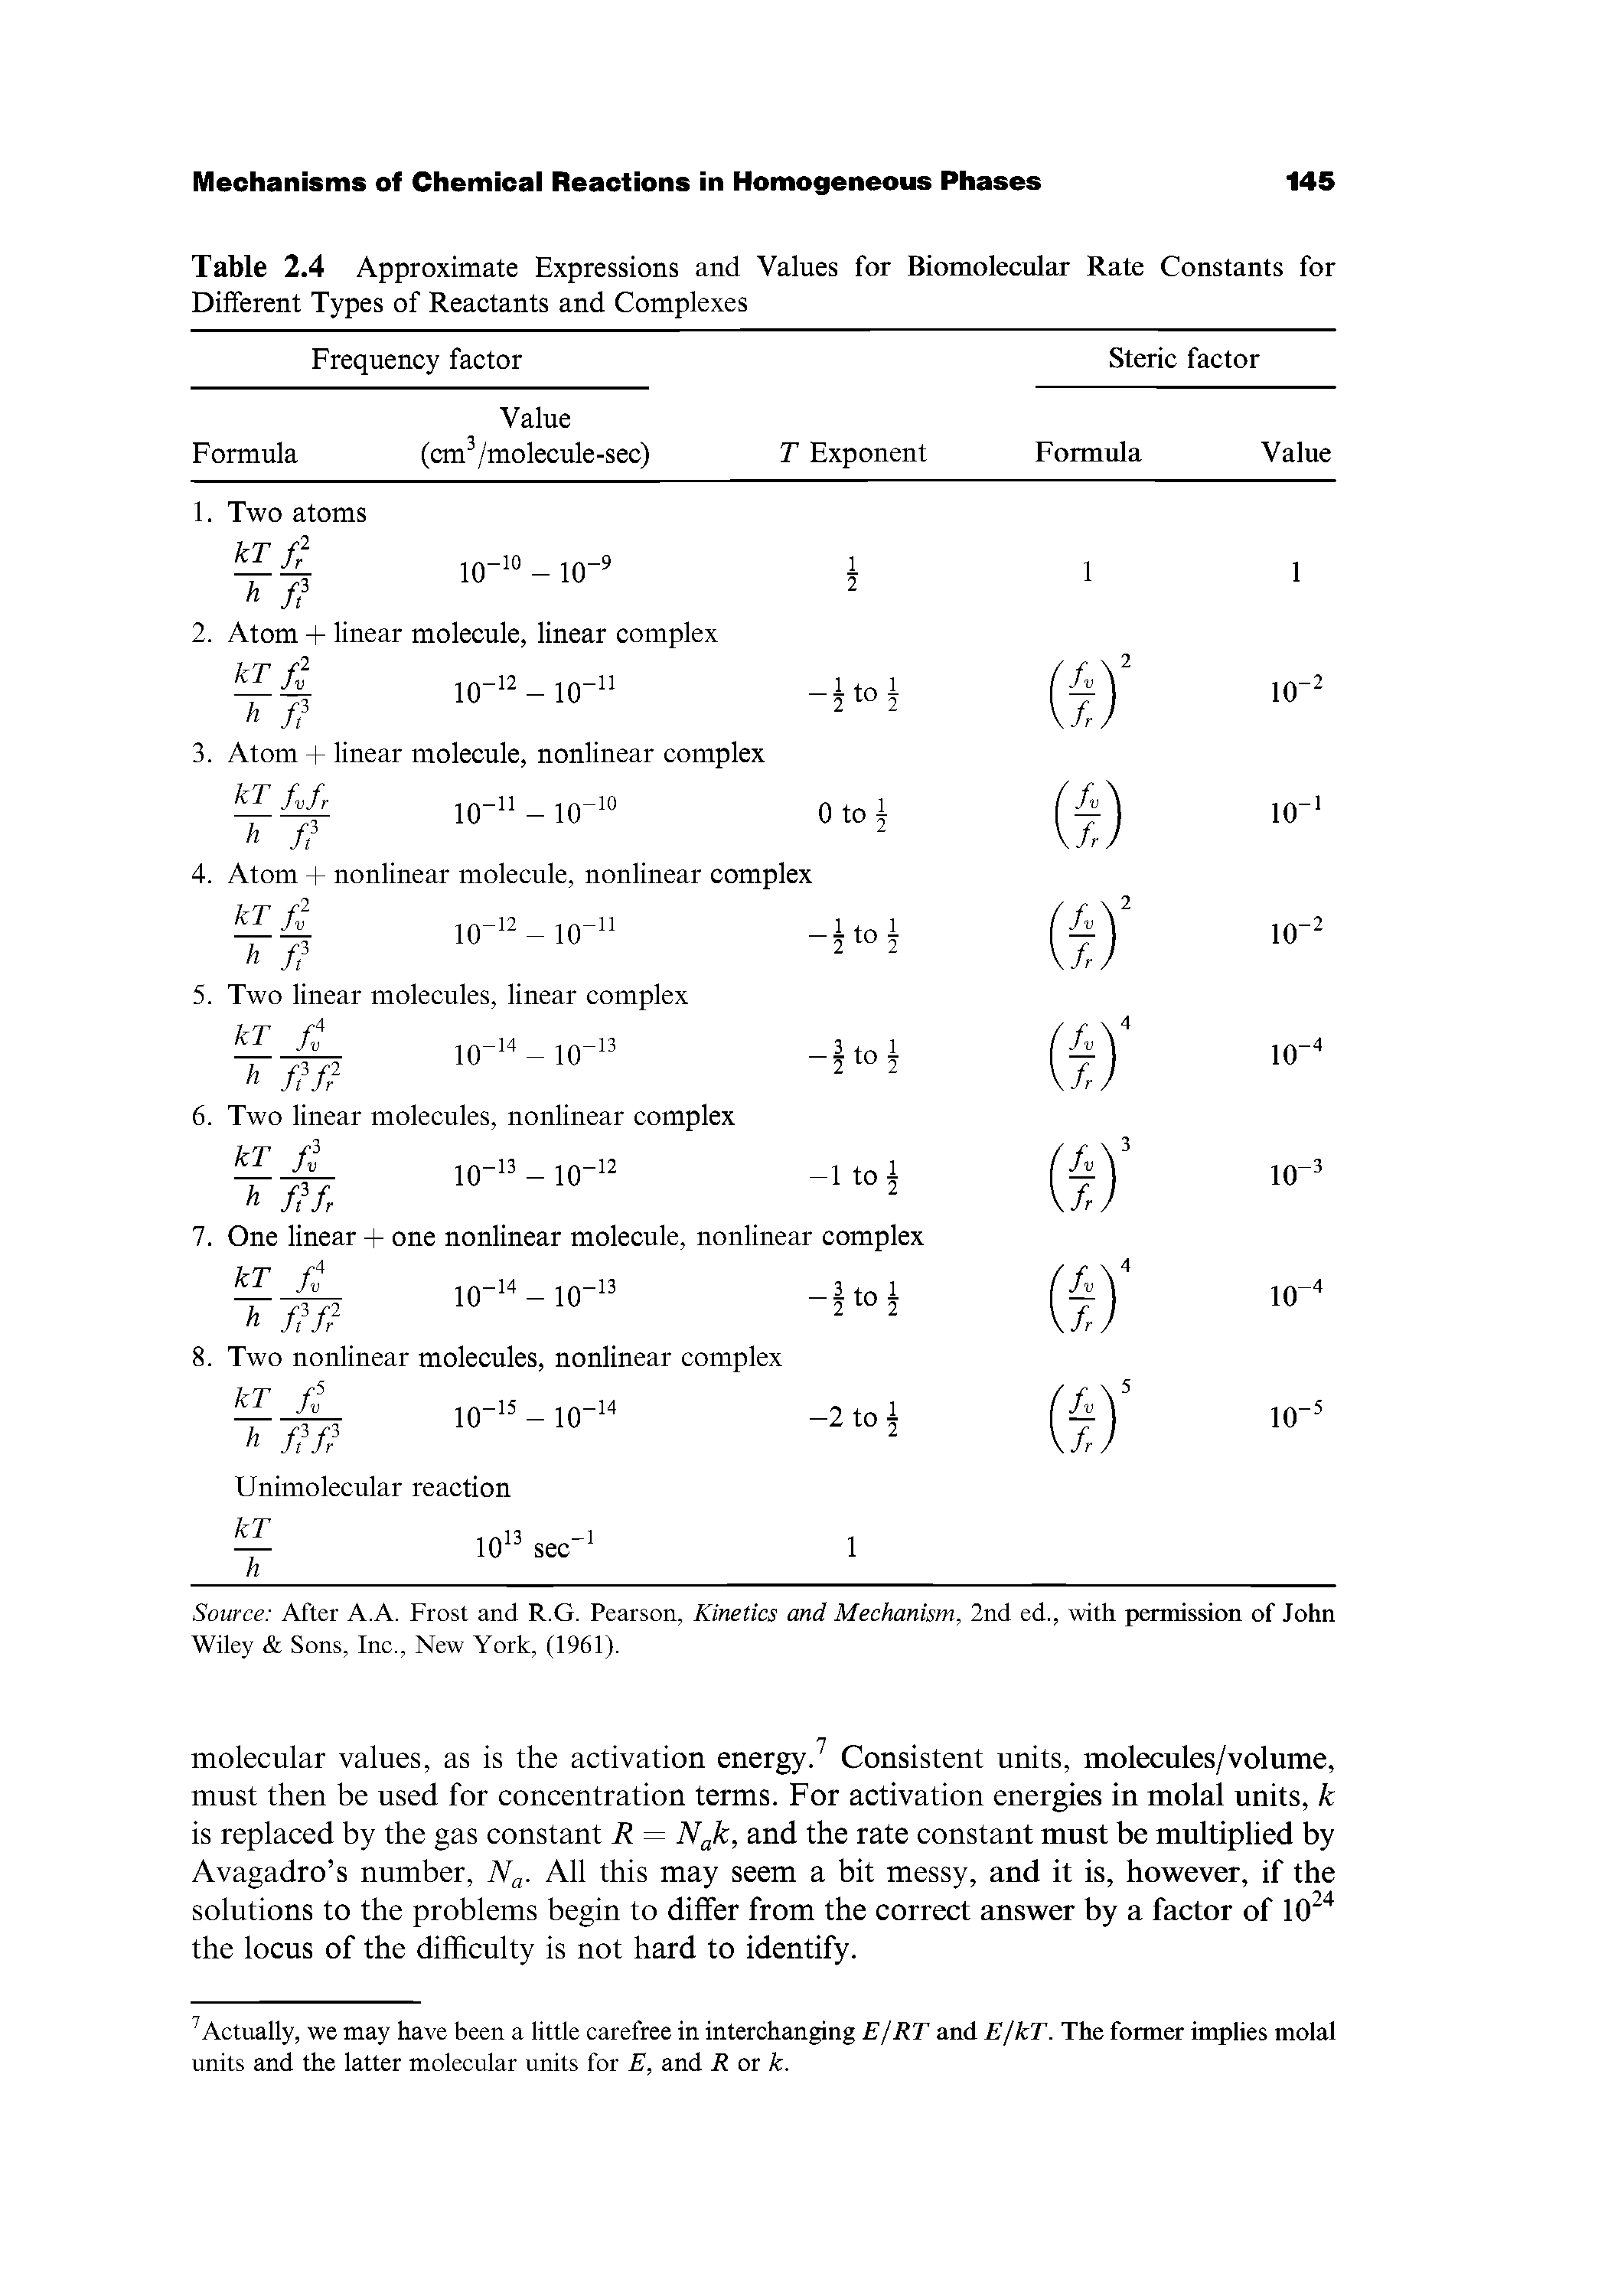 Table 2.4 Approximate Expressions and Values for Biomolecular Rate Constants for Different Types of Reactants and Complexes...